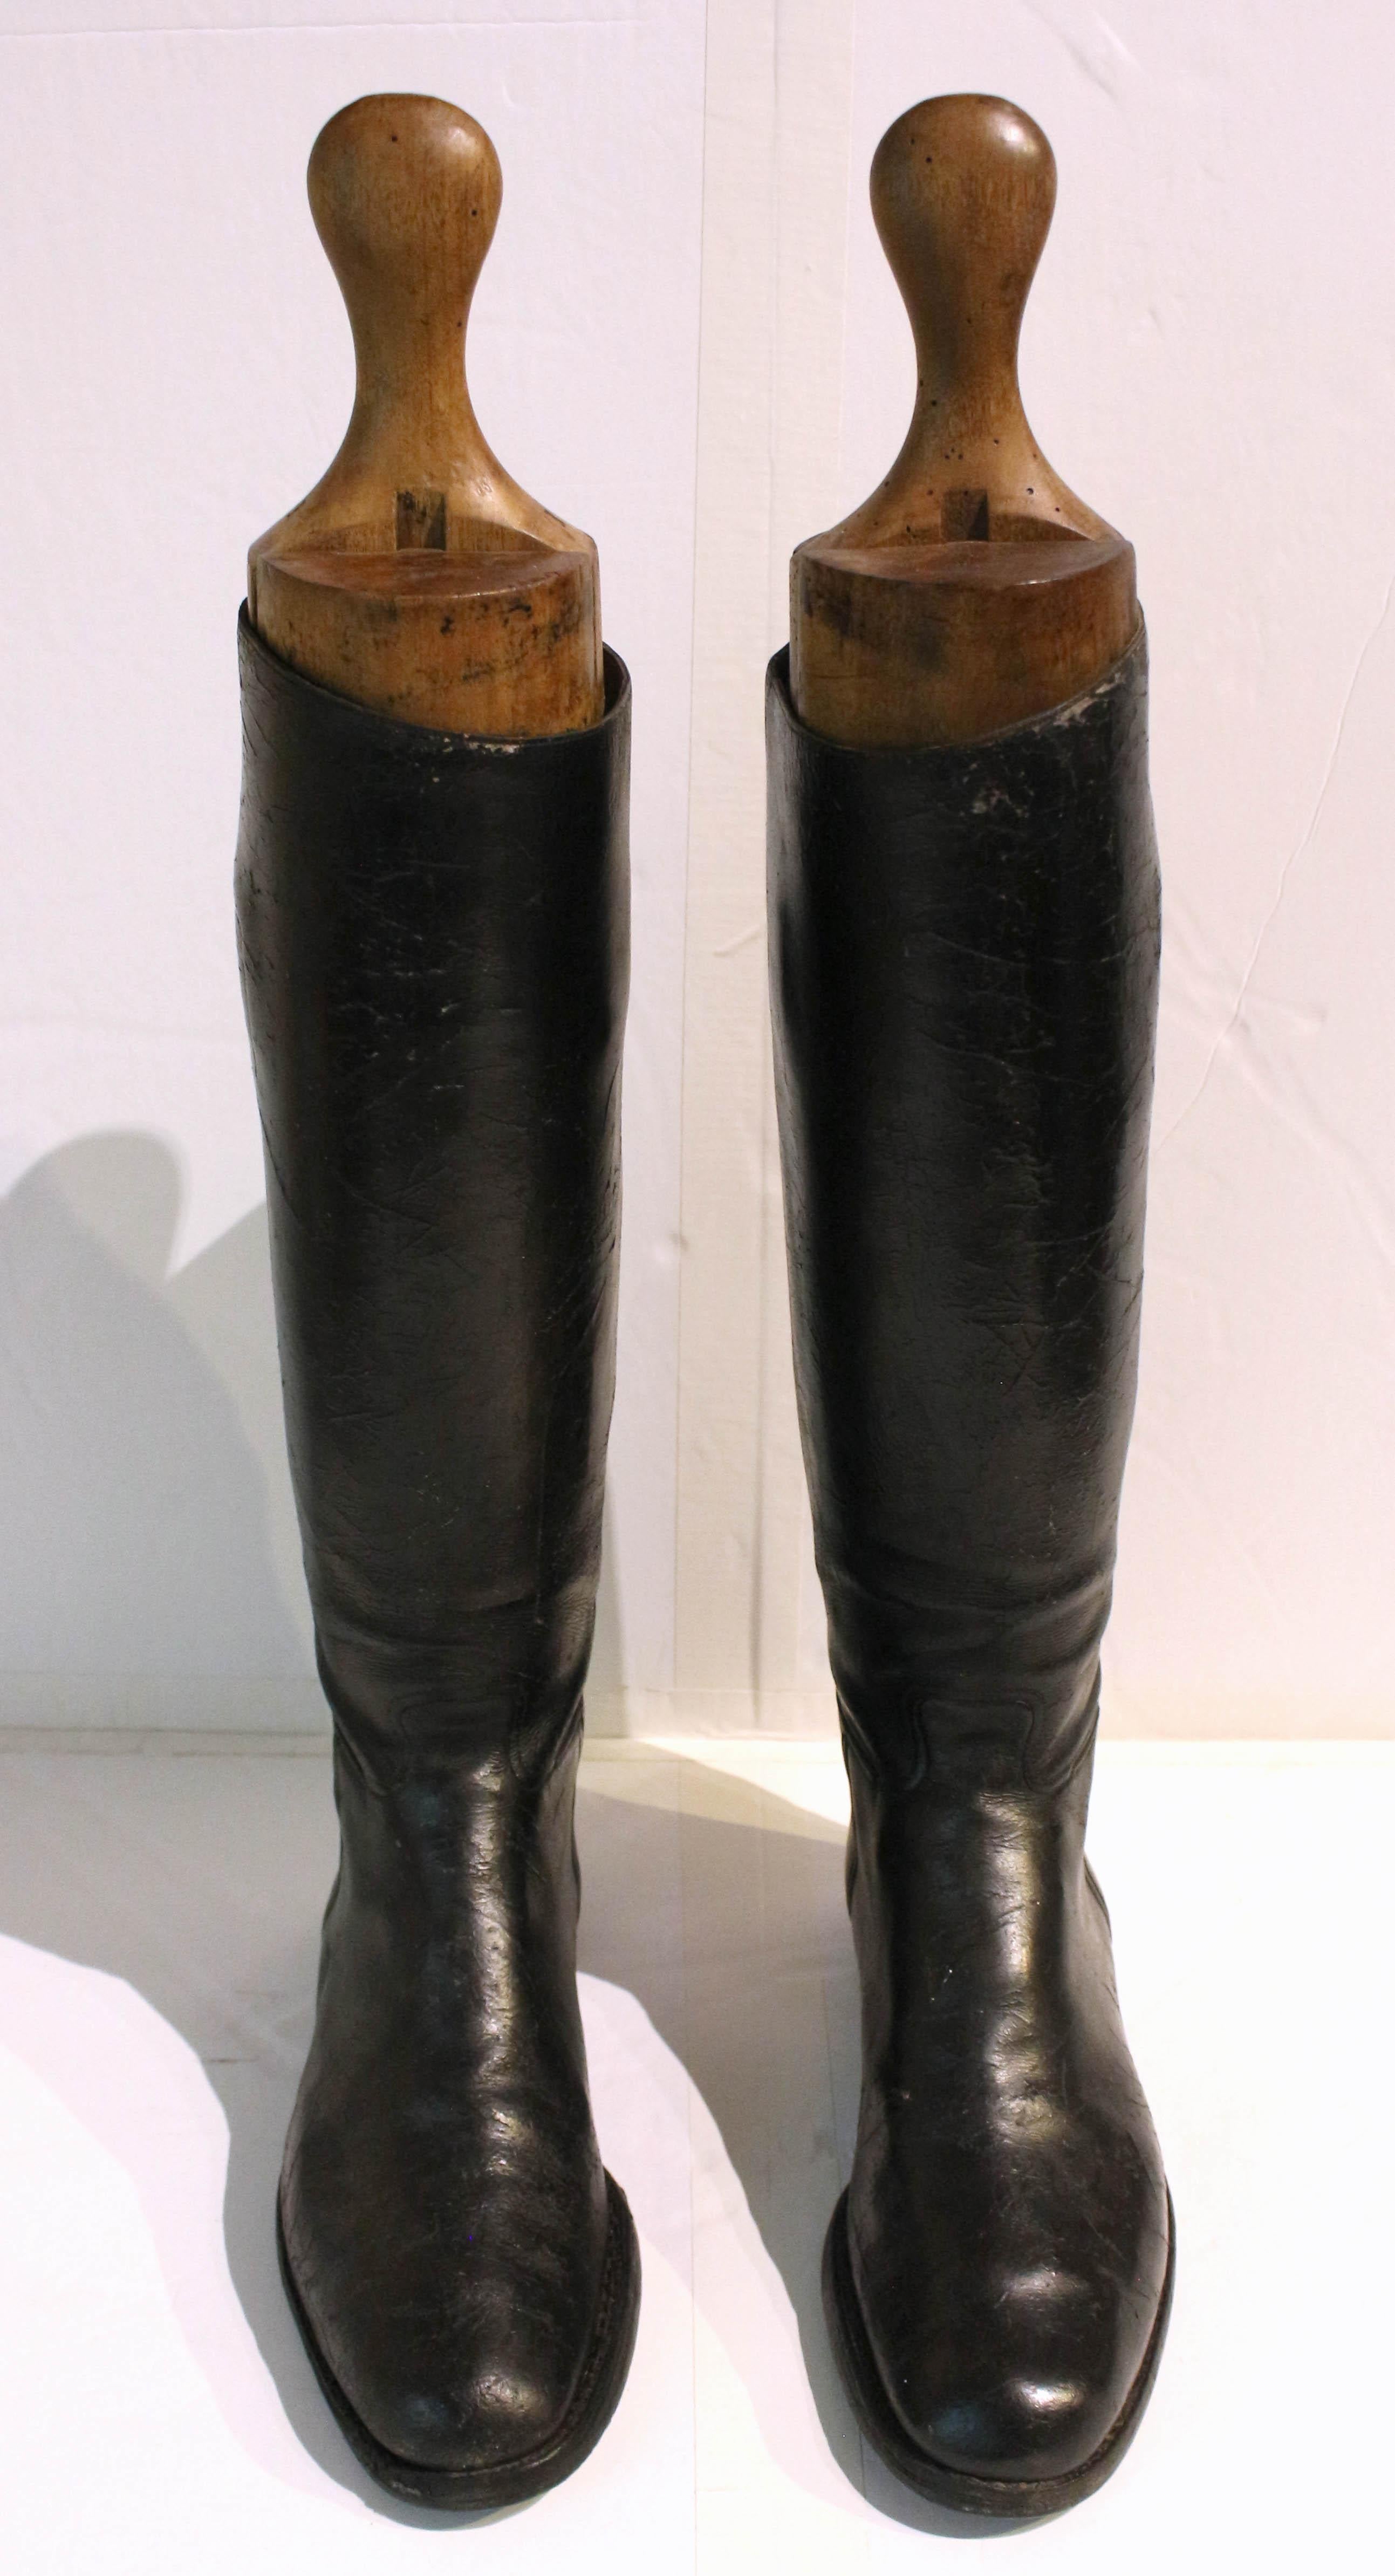 Late 19th to early 20th century leather pair of riding boots, English. With original turned wood trees or lasts. Rich black leather. Great fun & decoration!
24.75